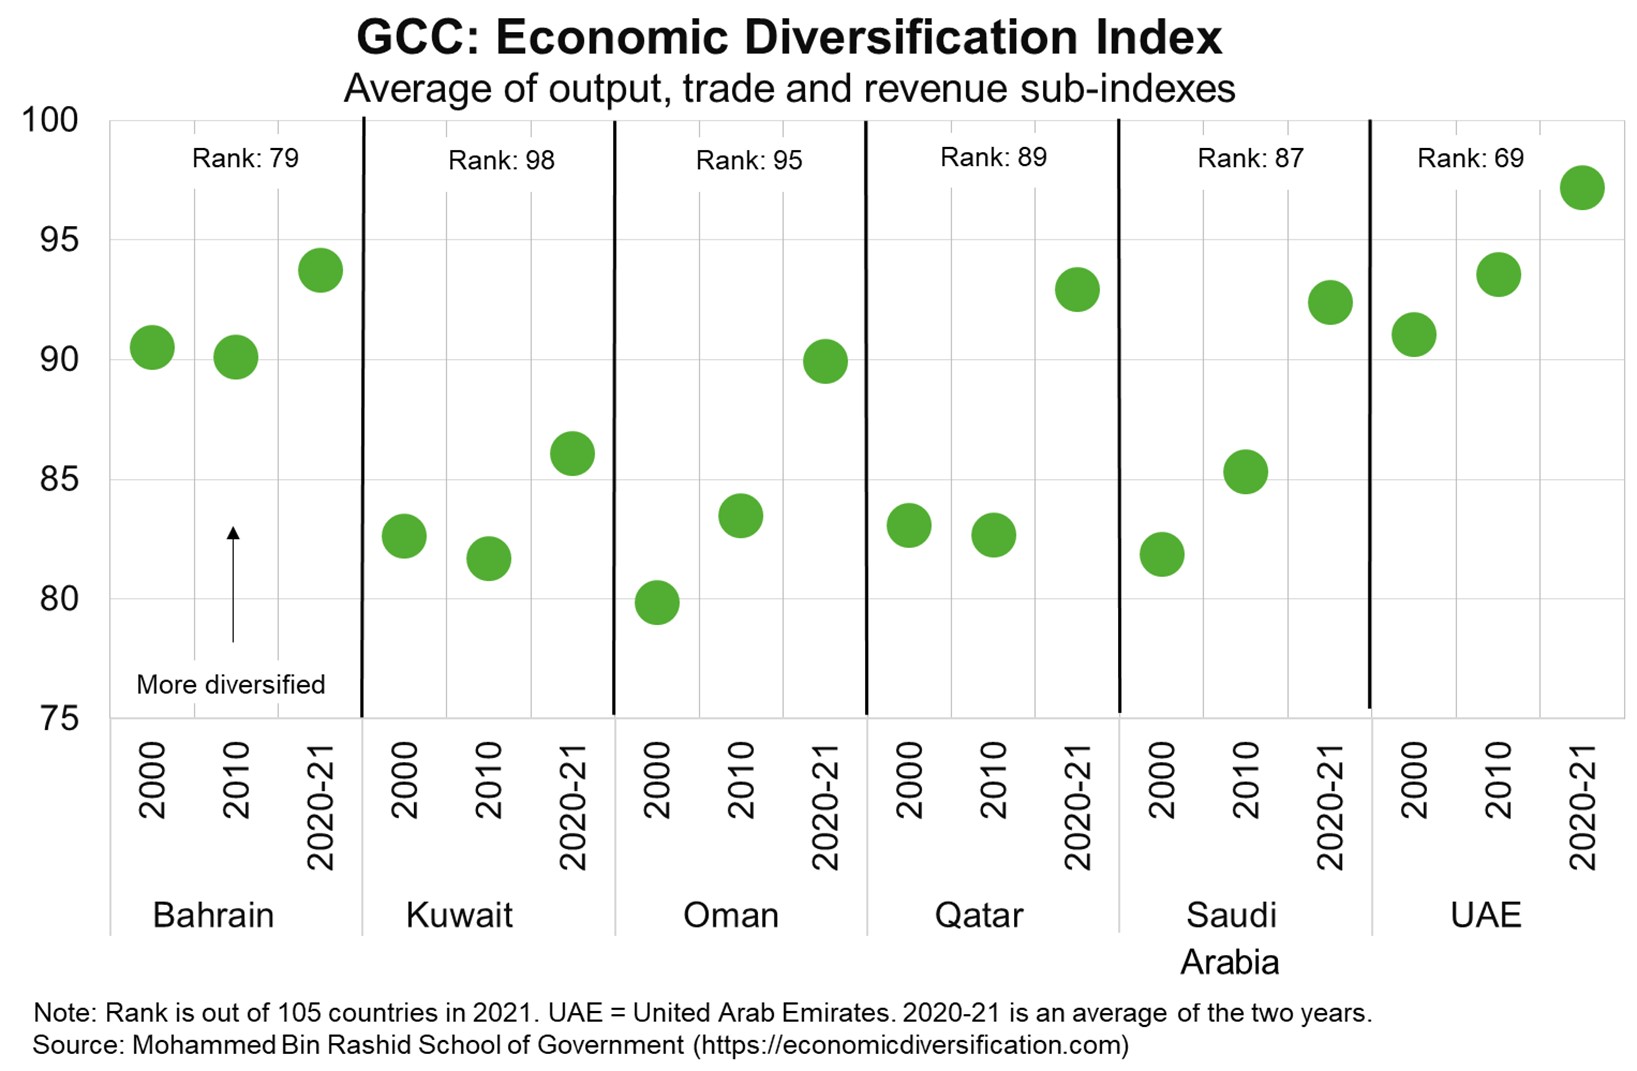 Indeed, GCC countries have improved significantly on the new Global Economic Diversification Index (EDI) since 2010 .